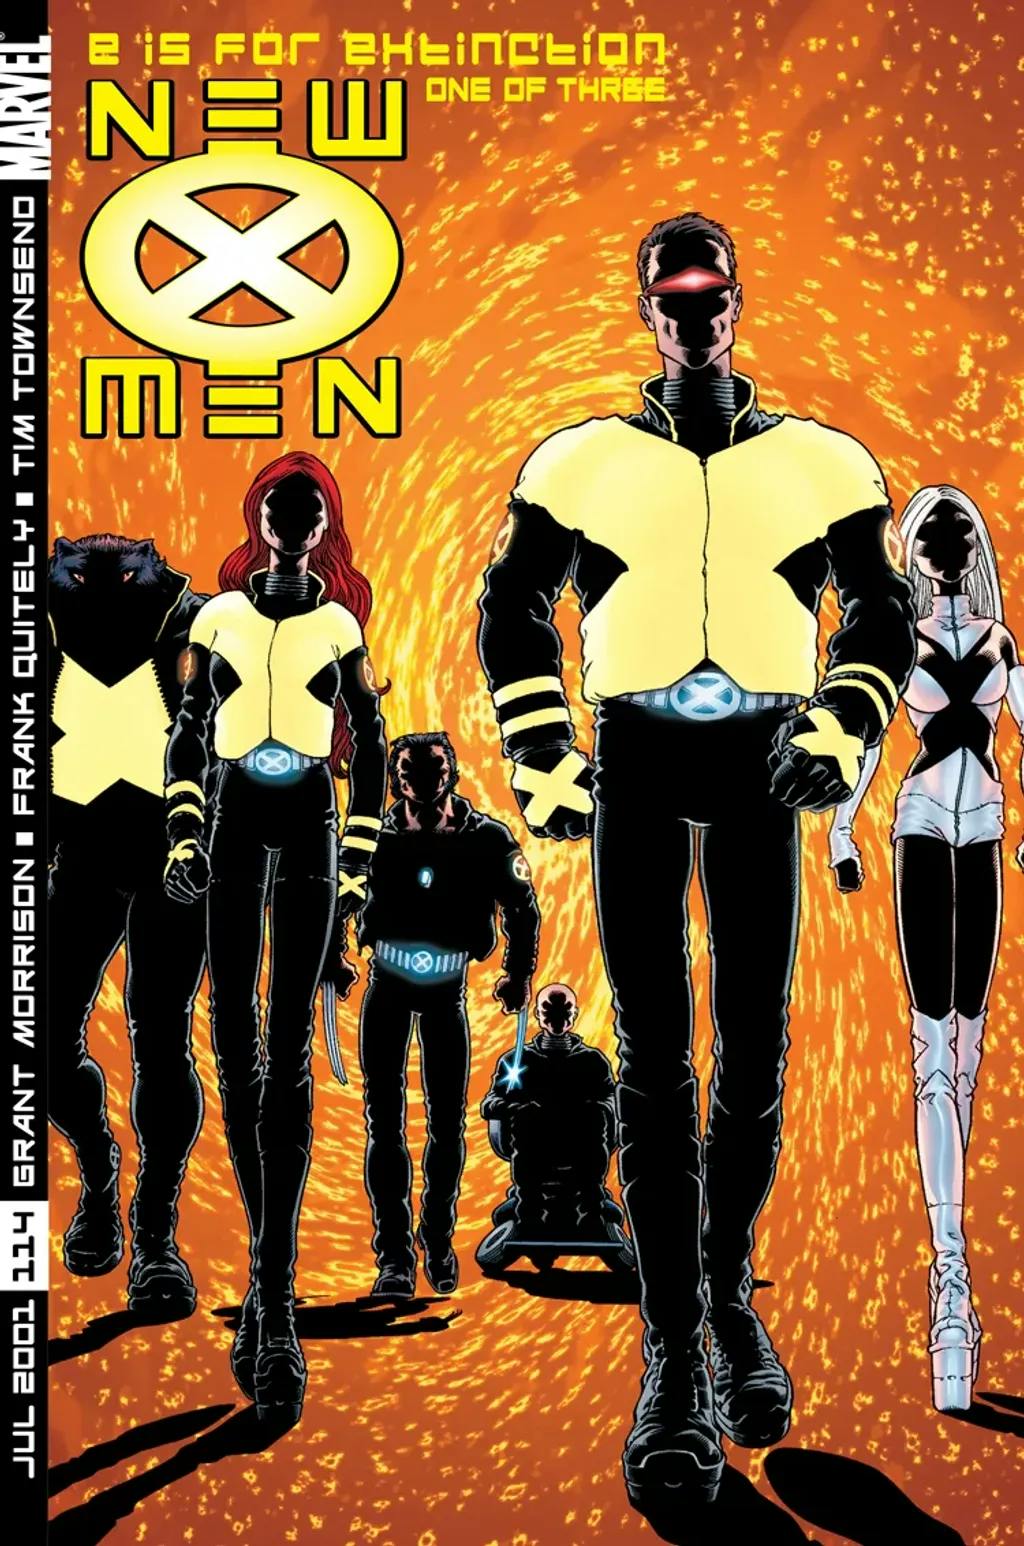 Cover of New X-Men #114 by Grant Morrison and Frank Quitely